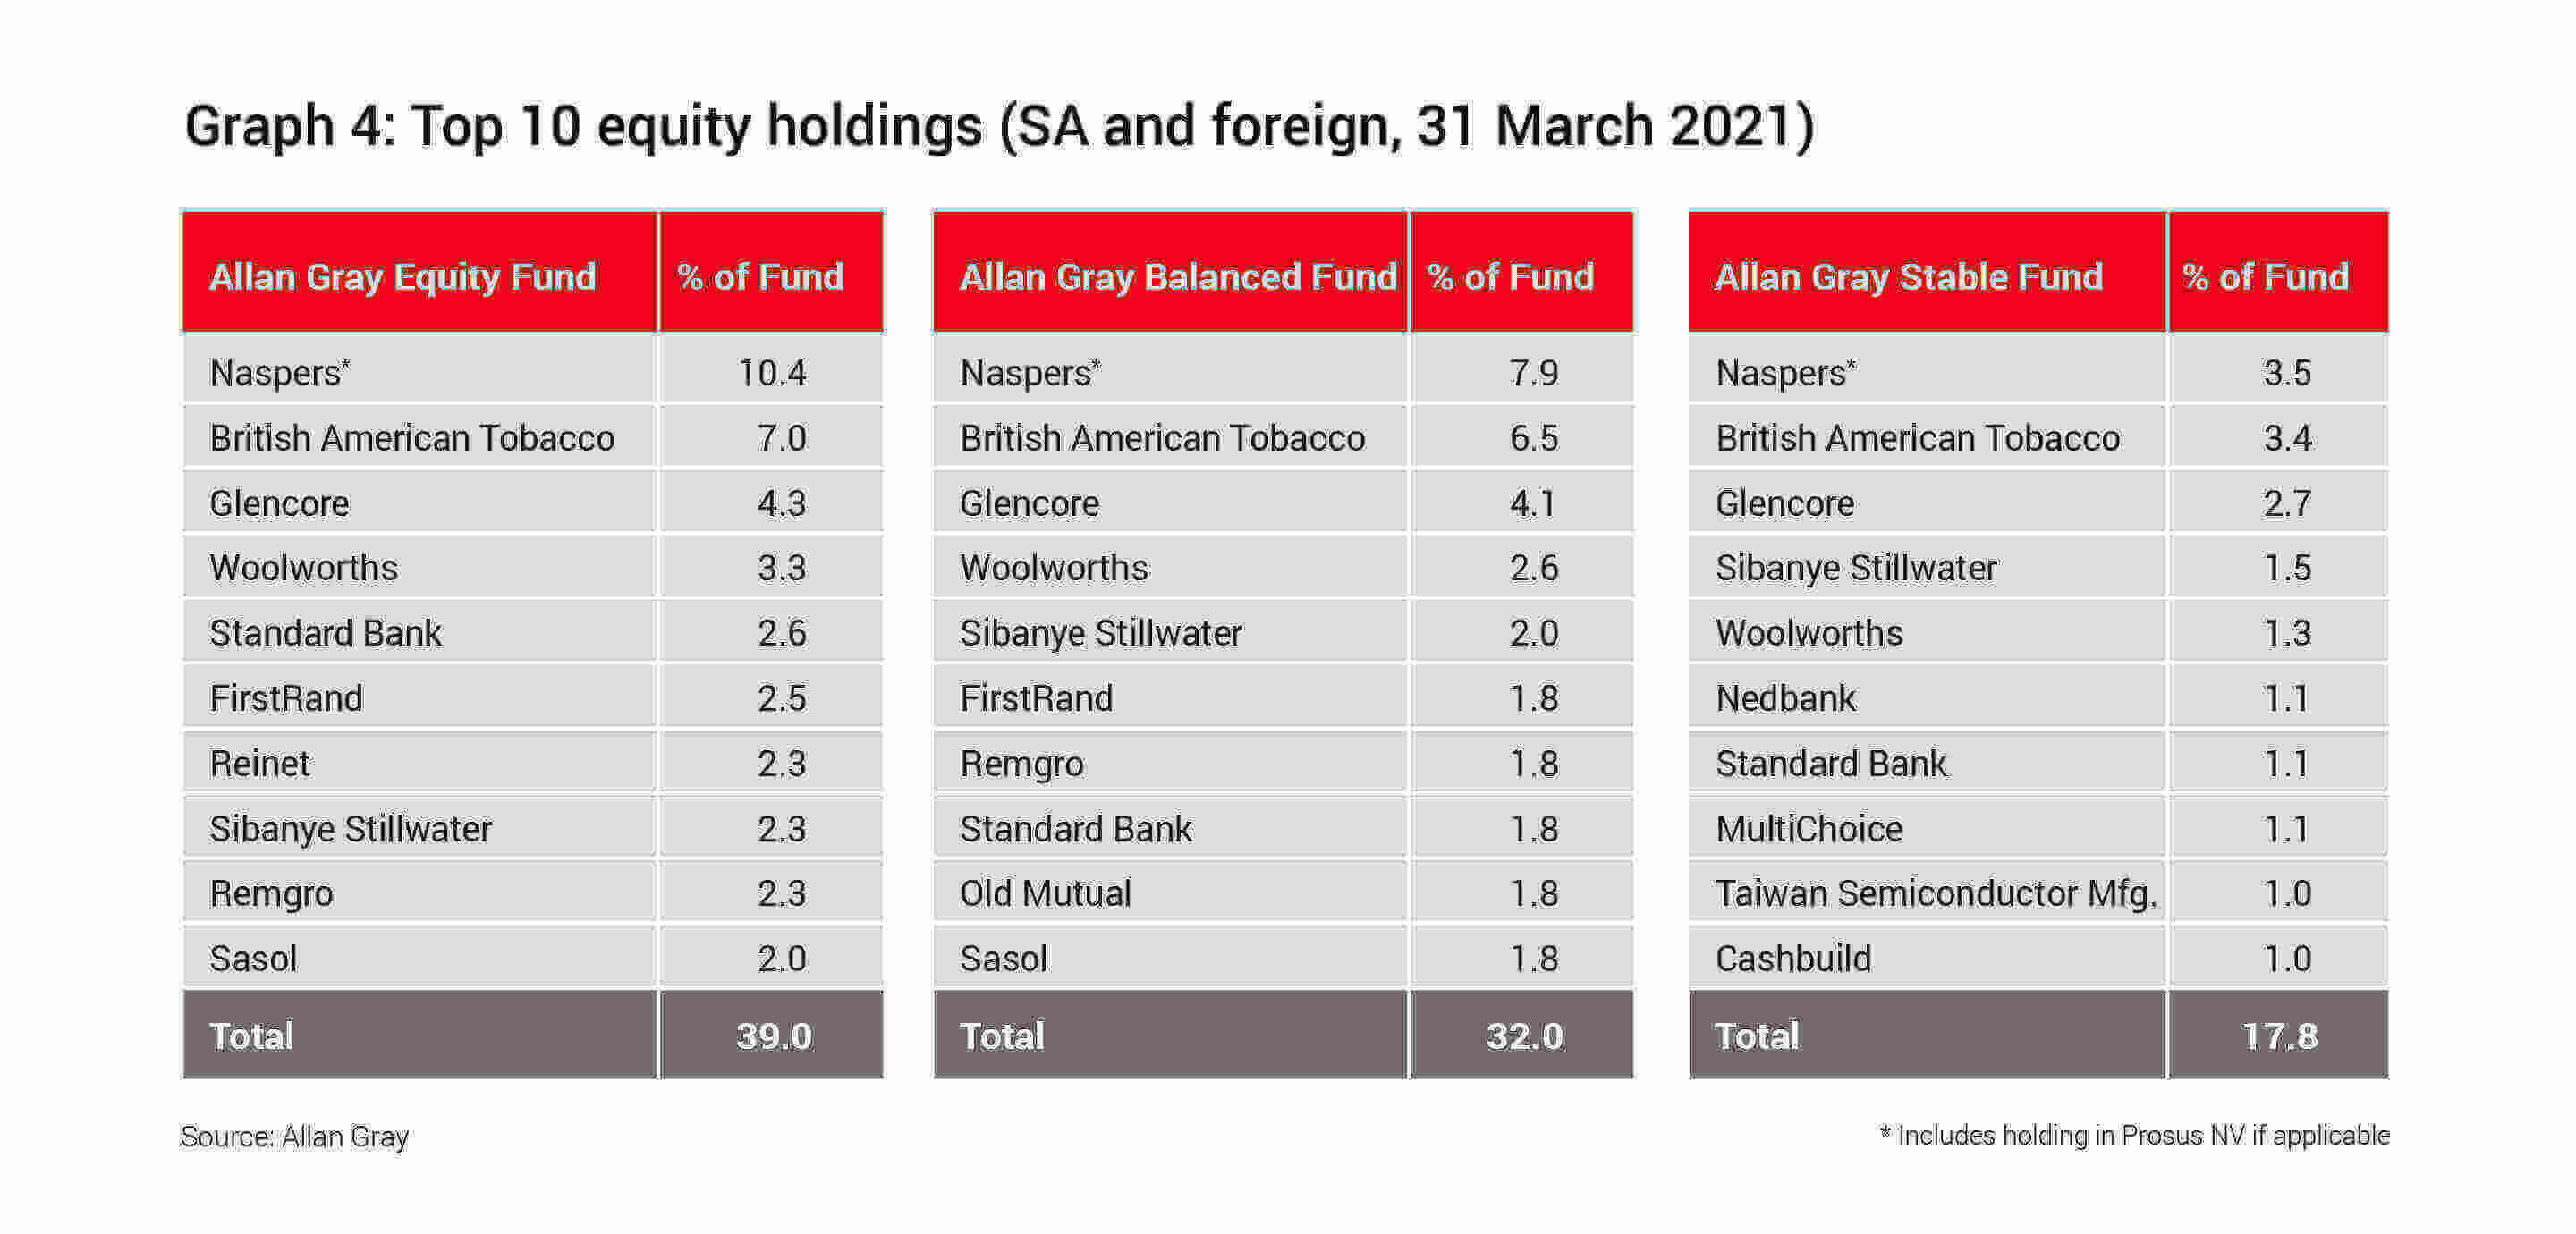 Top 10 local and foreign equity holdings in the Equity, Balanced and Stable funds - Allan Gray